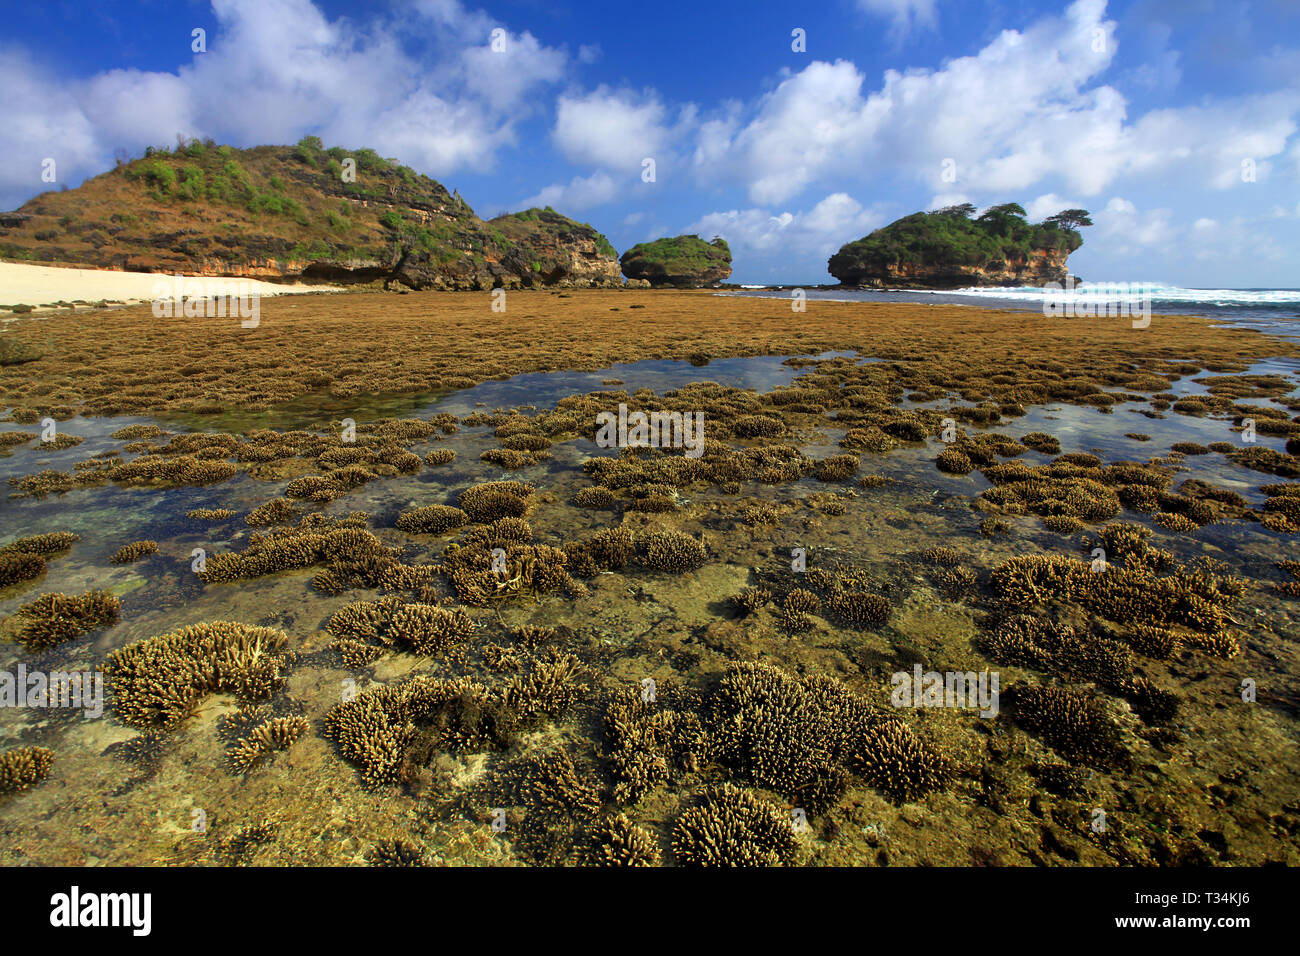 Coral Reef at low tide, Indonesia Stock Photo